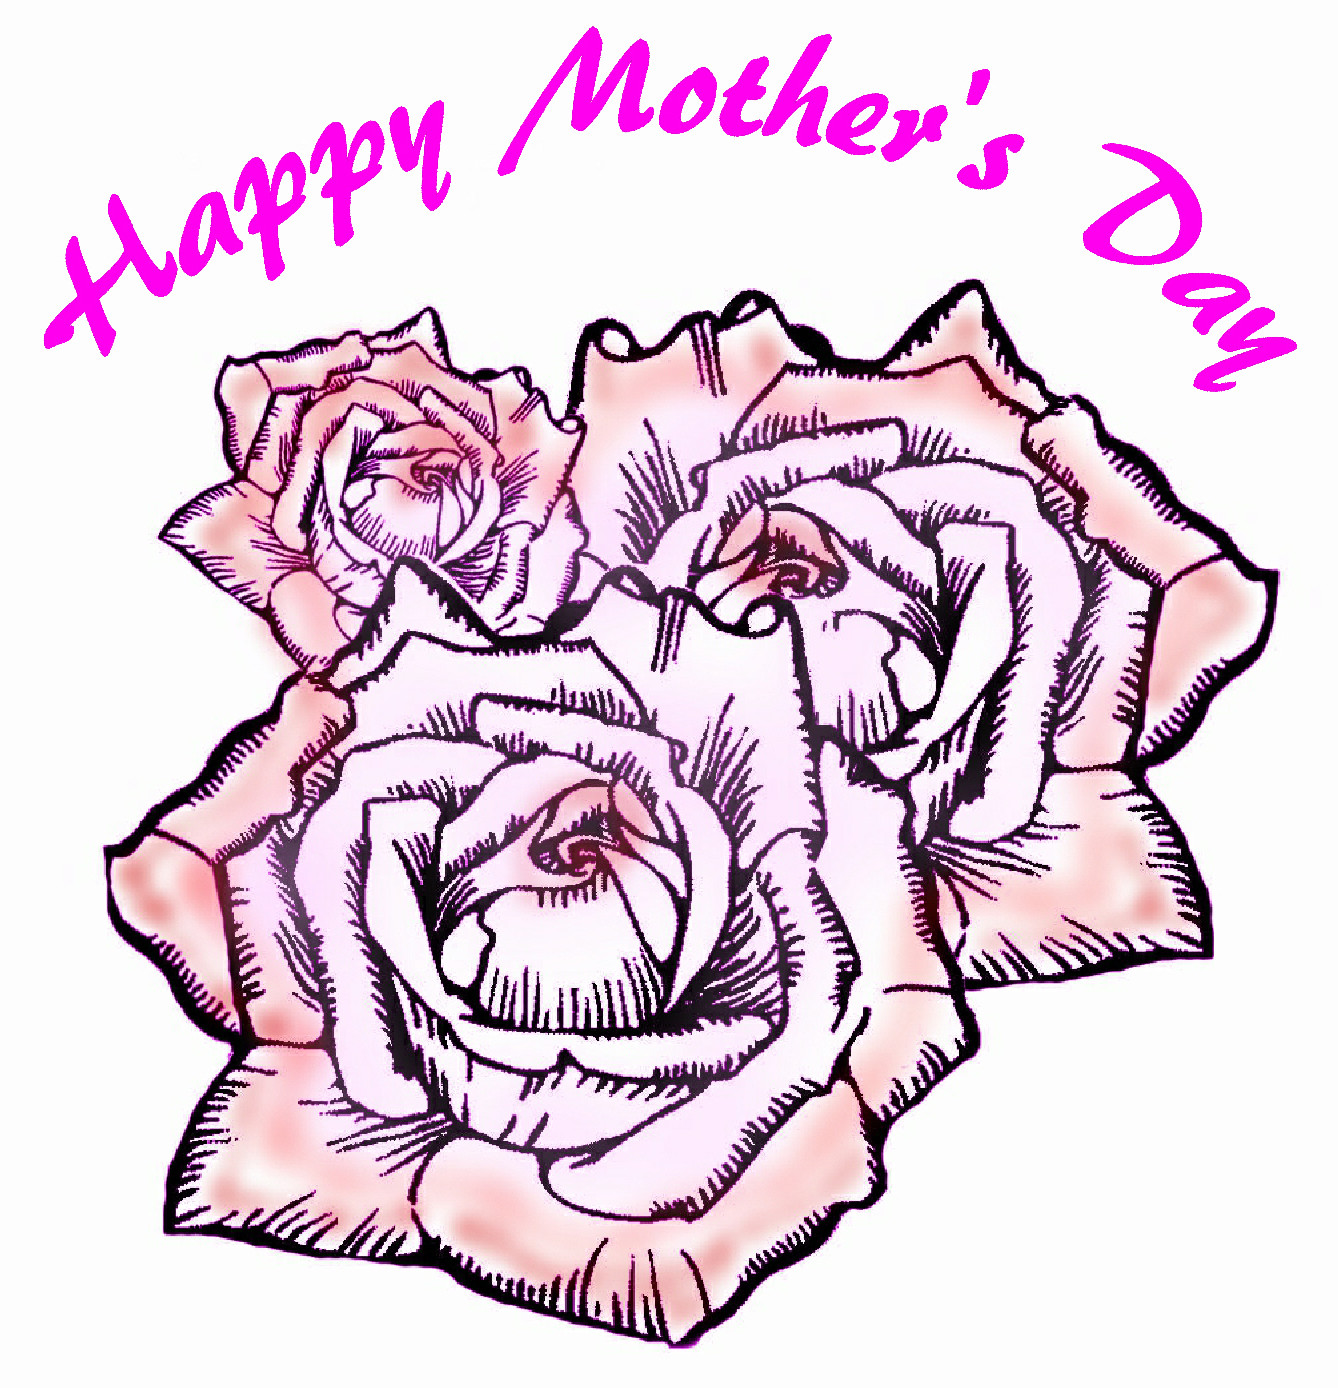 Public Domain Clip Art Photos and Images: Mothers Day